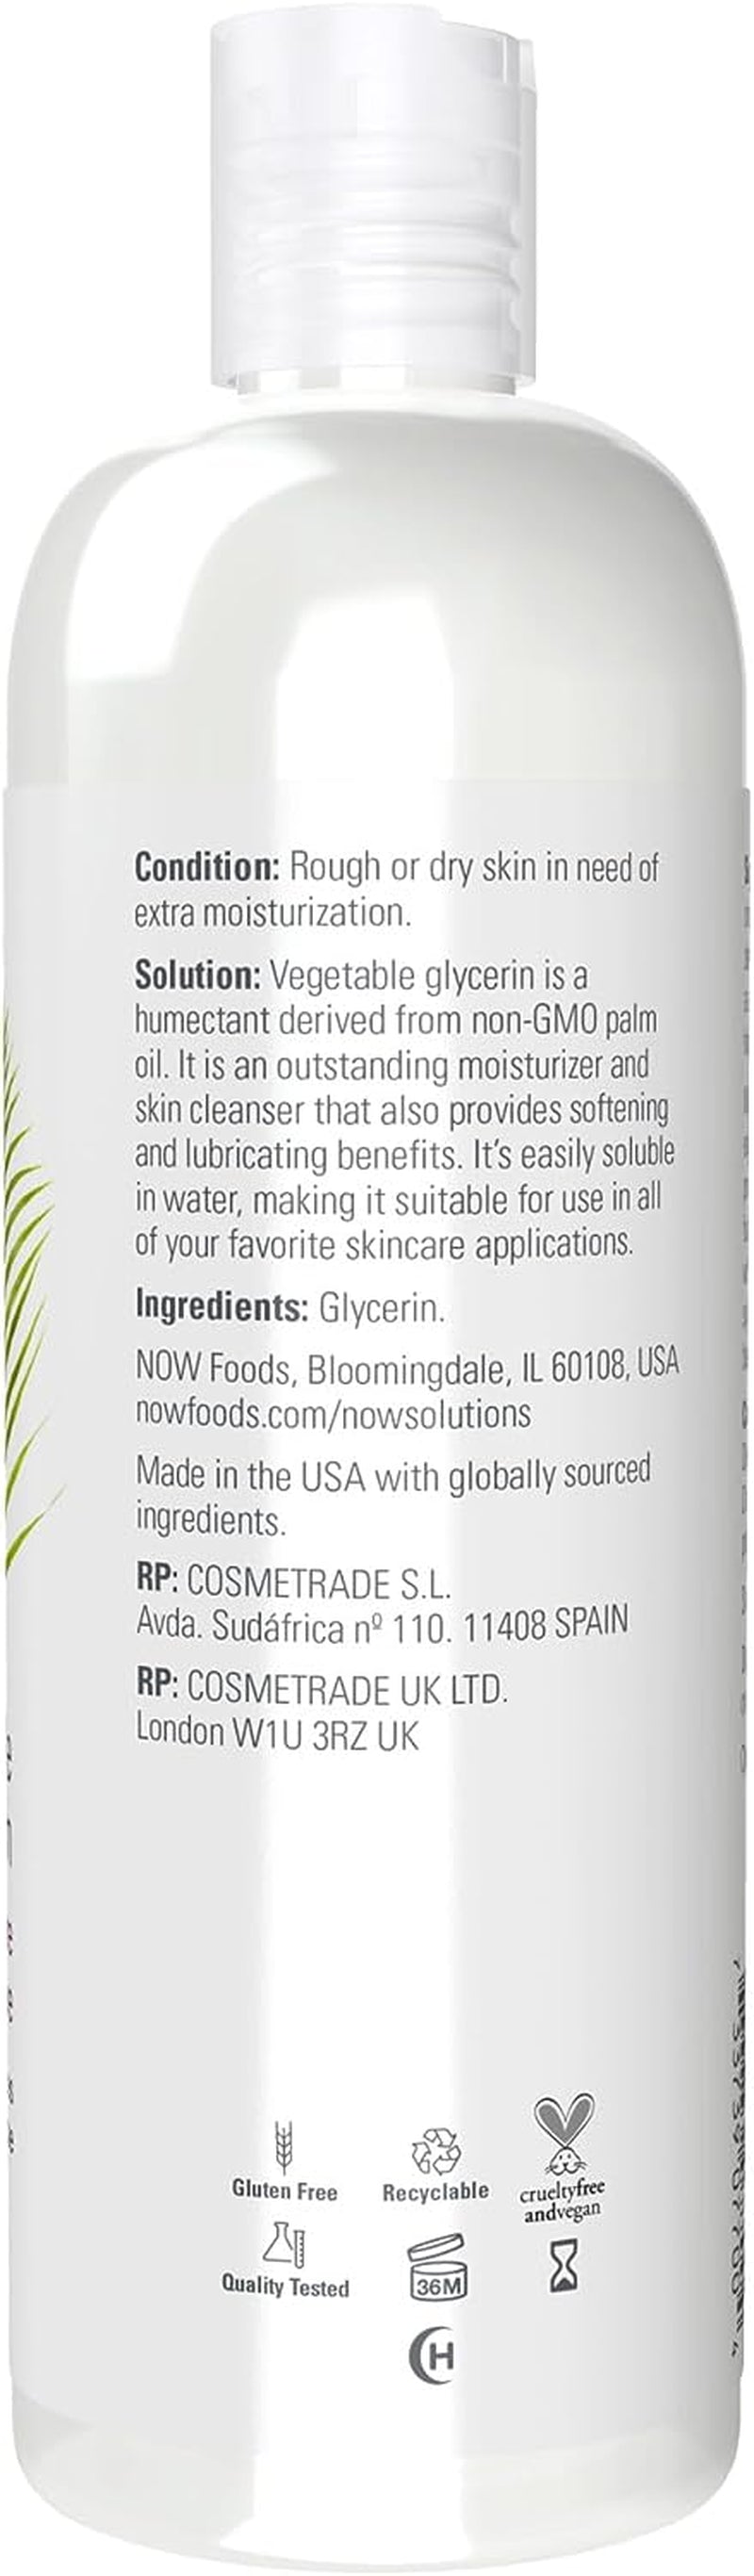 "Ultimate Skin Care Solution: 100% Pure Vegetable Glycerin for Soft, Moisturized Skin - 16-Ounce"